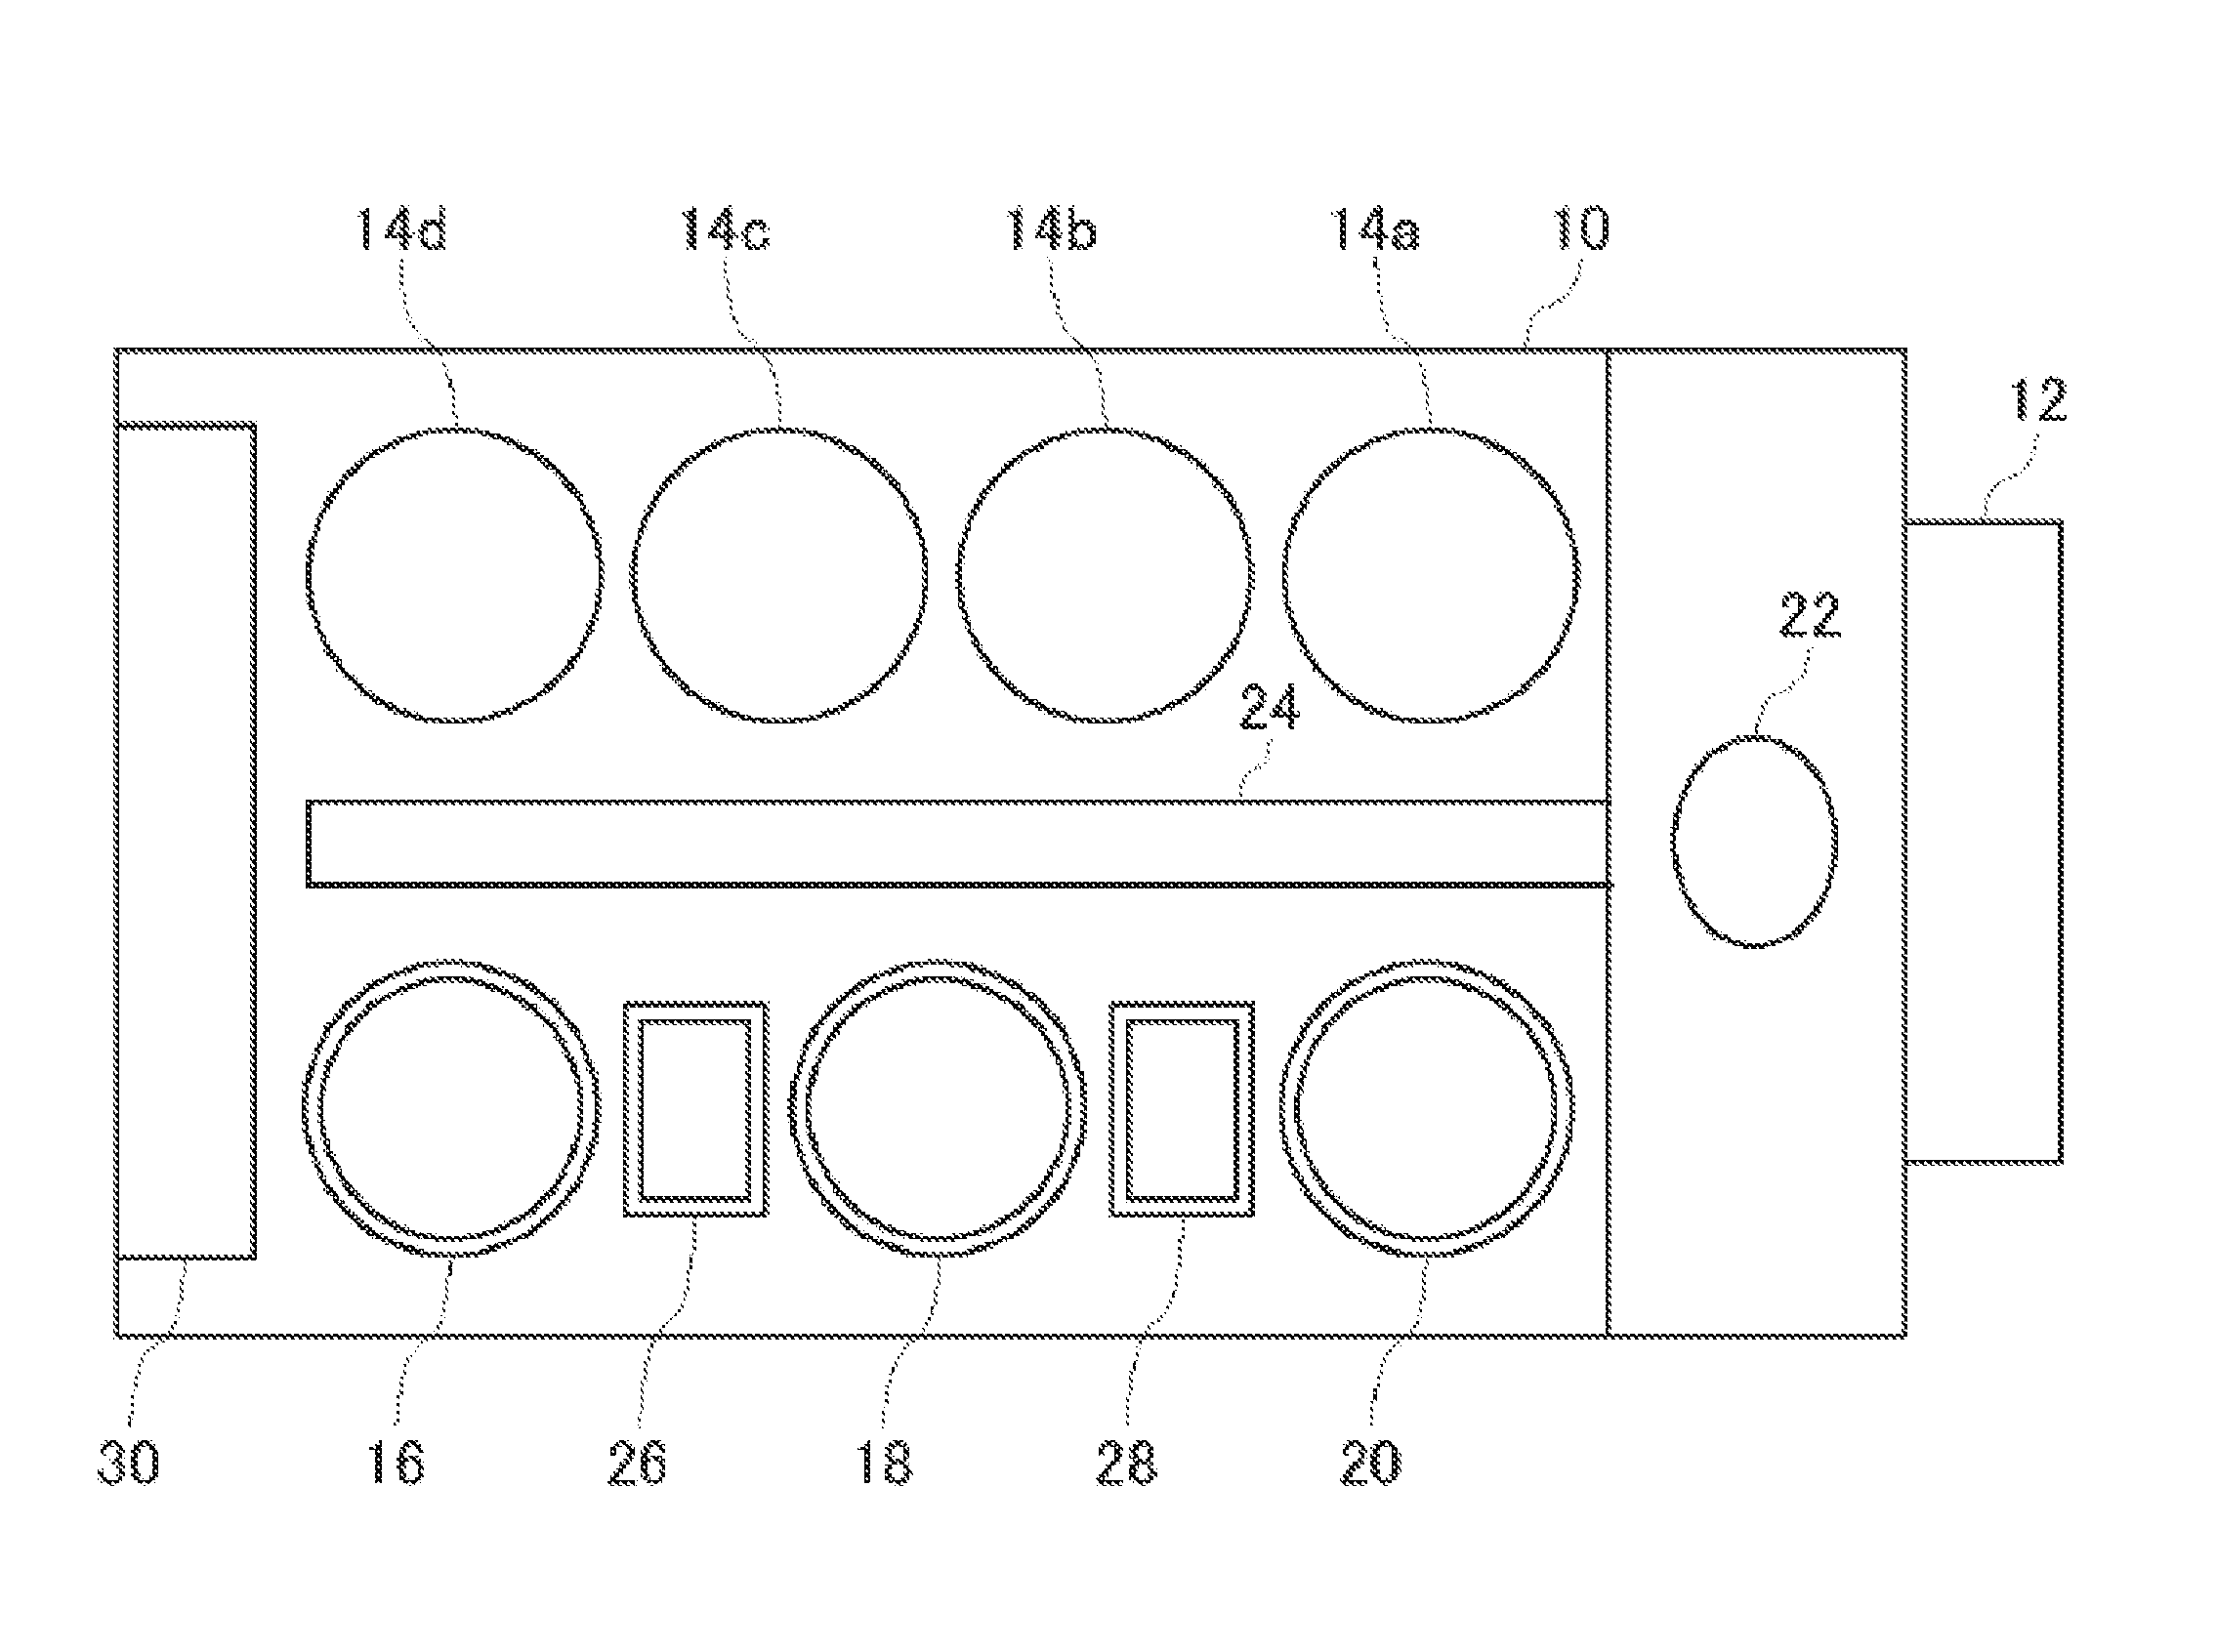 Substrate cleaning apparatus